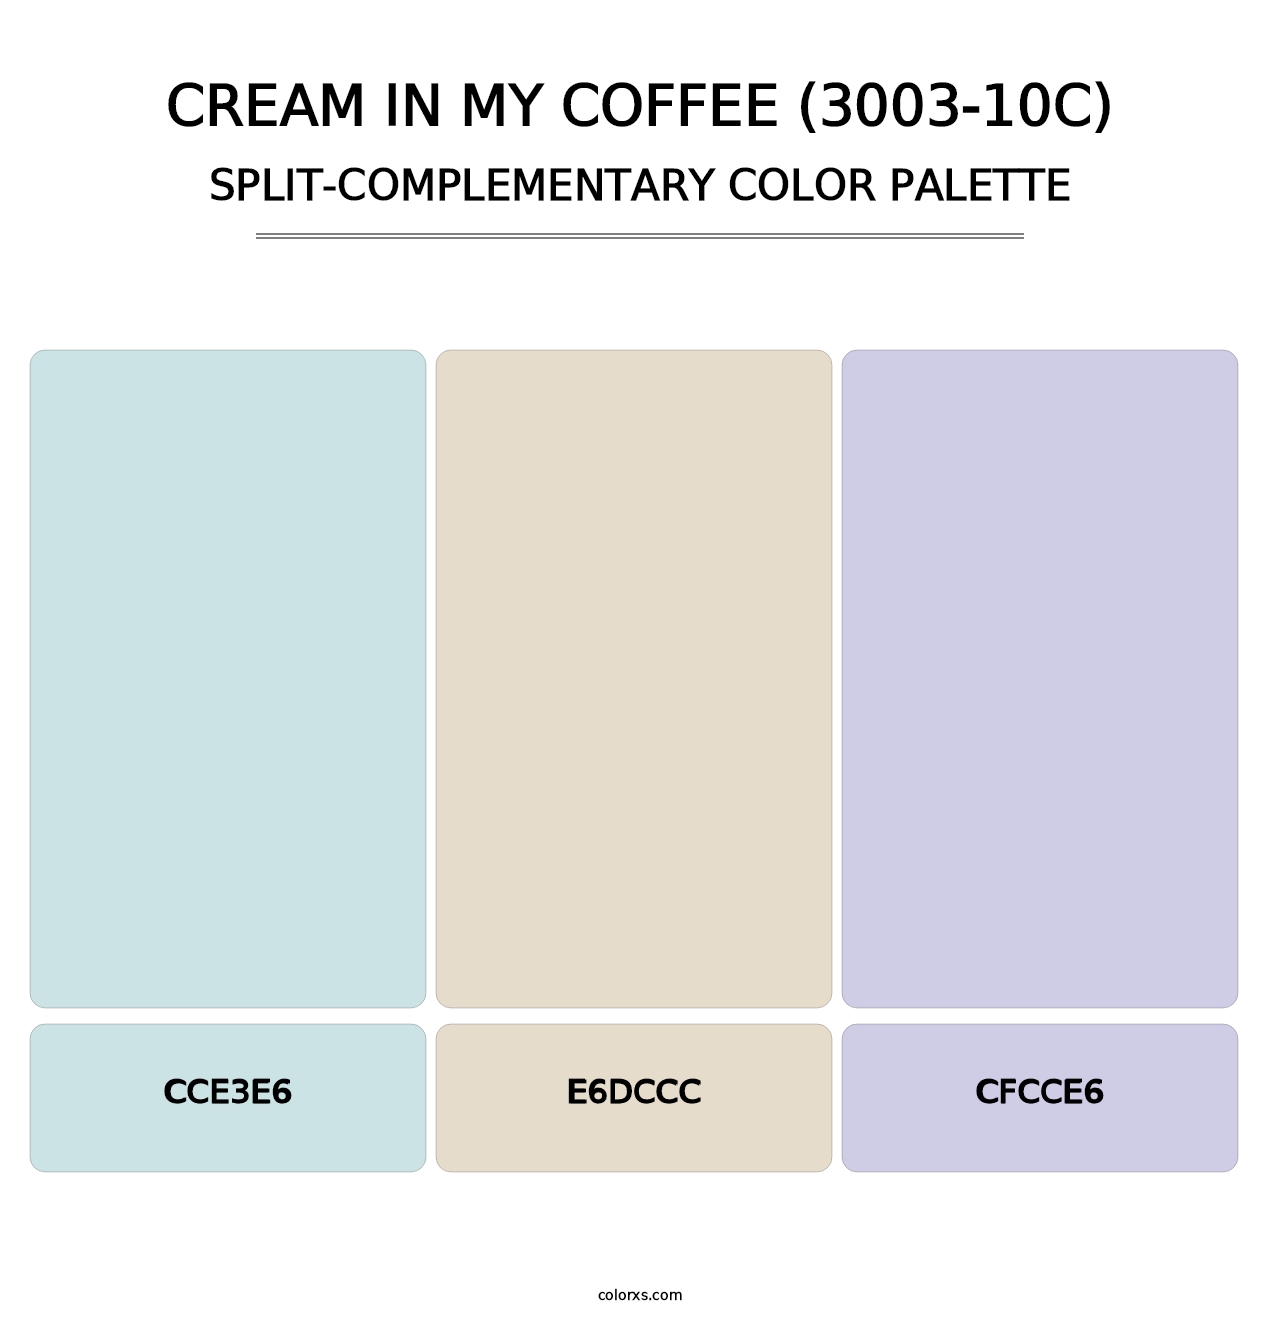 Cream in My Coffee (3003-10C) - Split-Complementary Color Palette